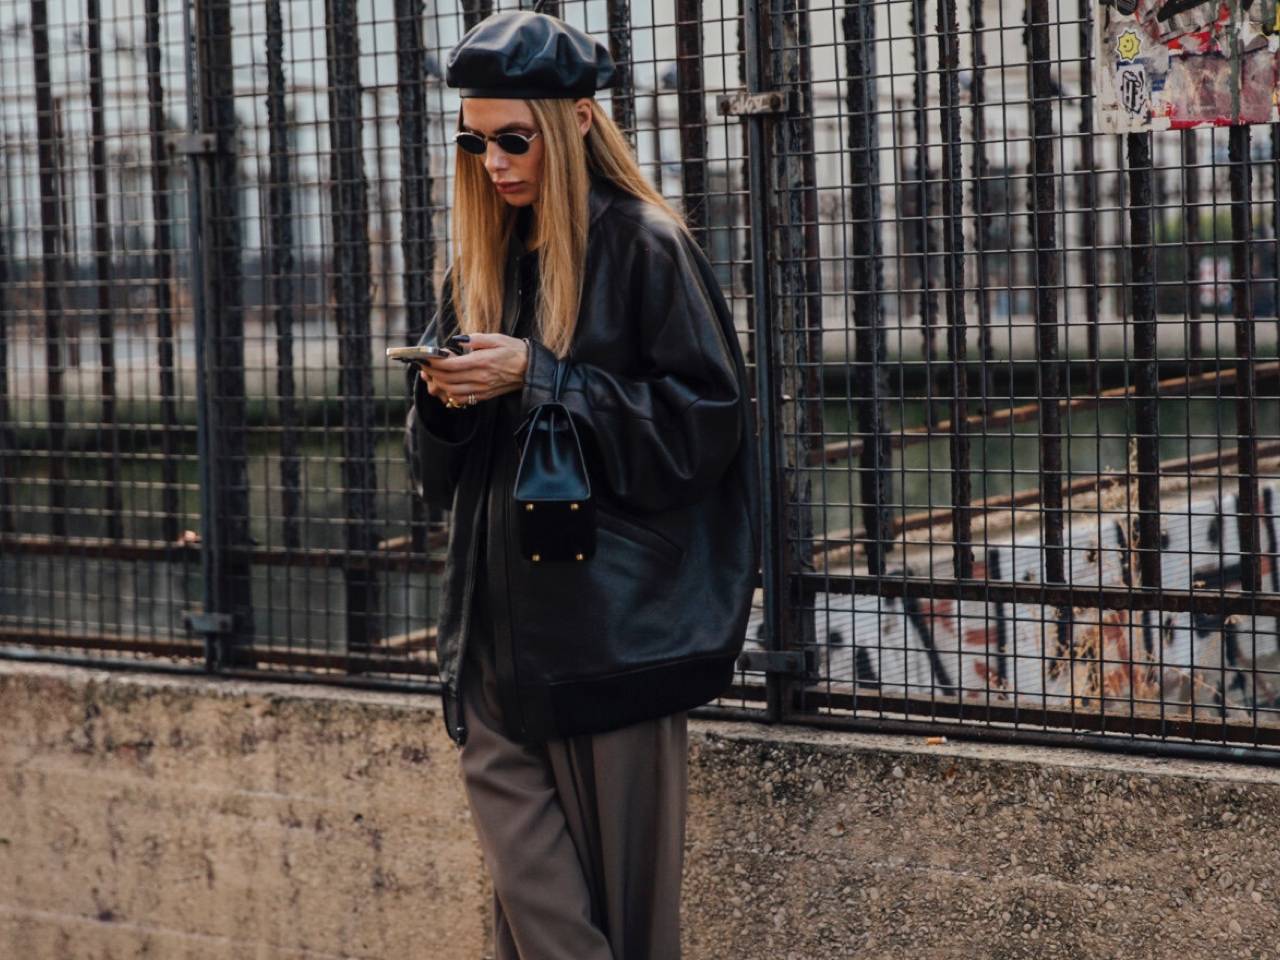 Lyst Explores Instagram’s Influence on Brand Performance in Partnership ...